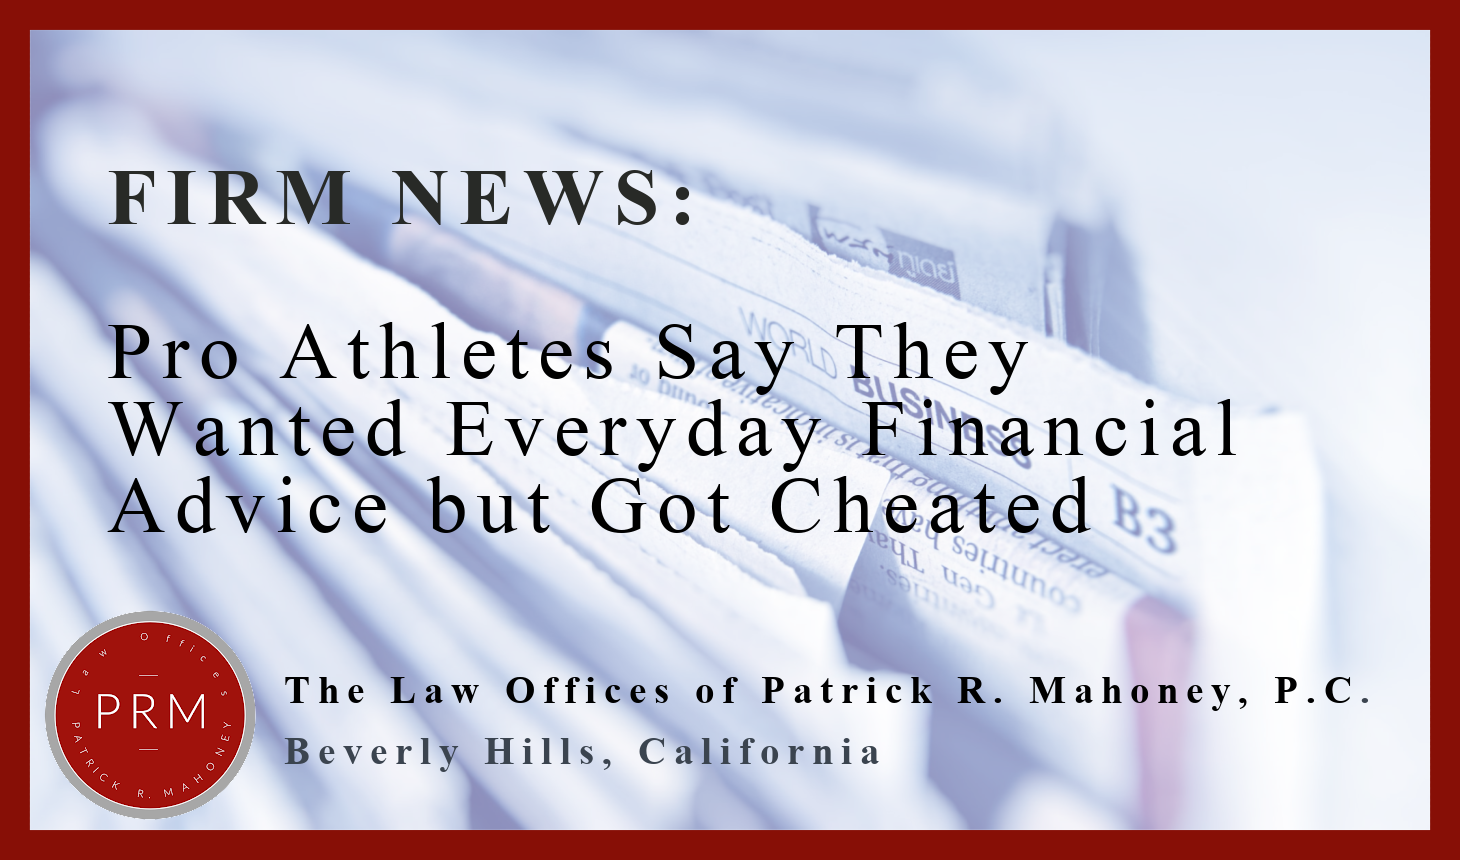 Pro Athletes Say They Wanted Everyday Financial Advice but Got Cheated